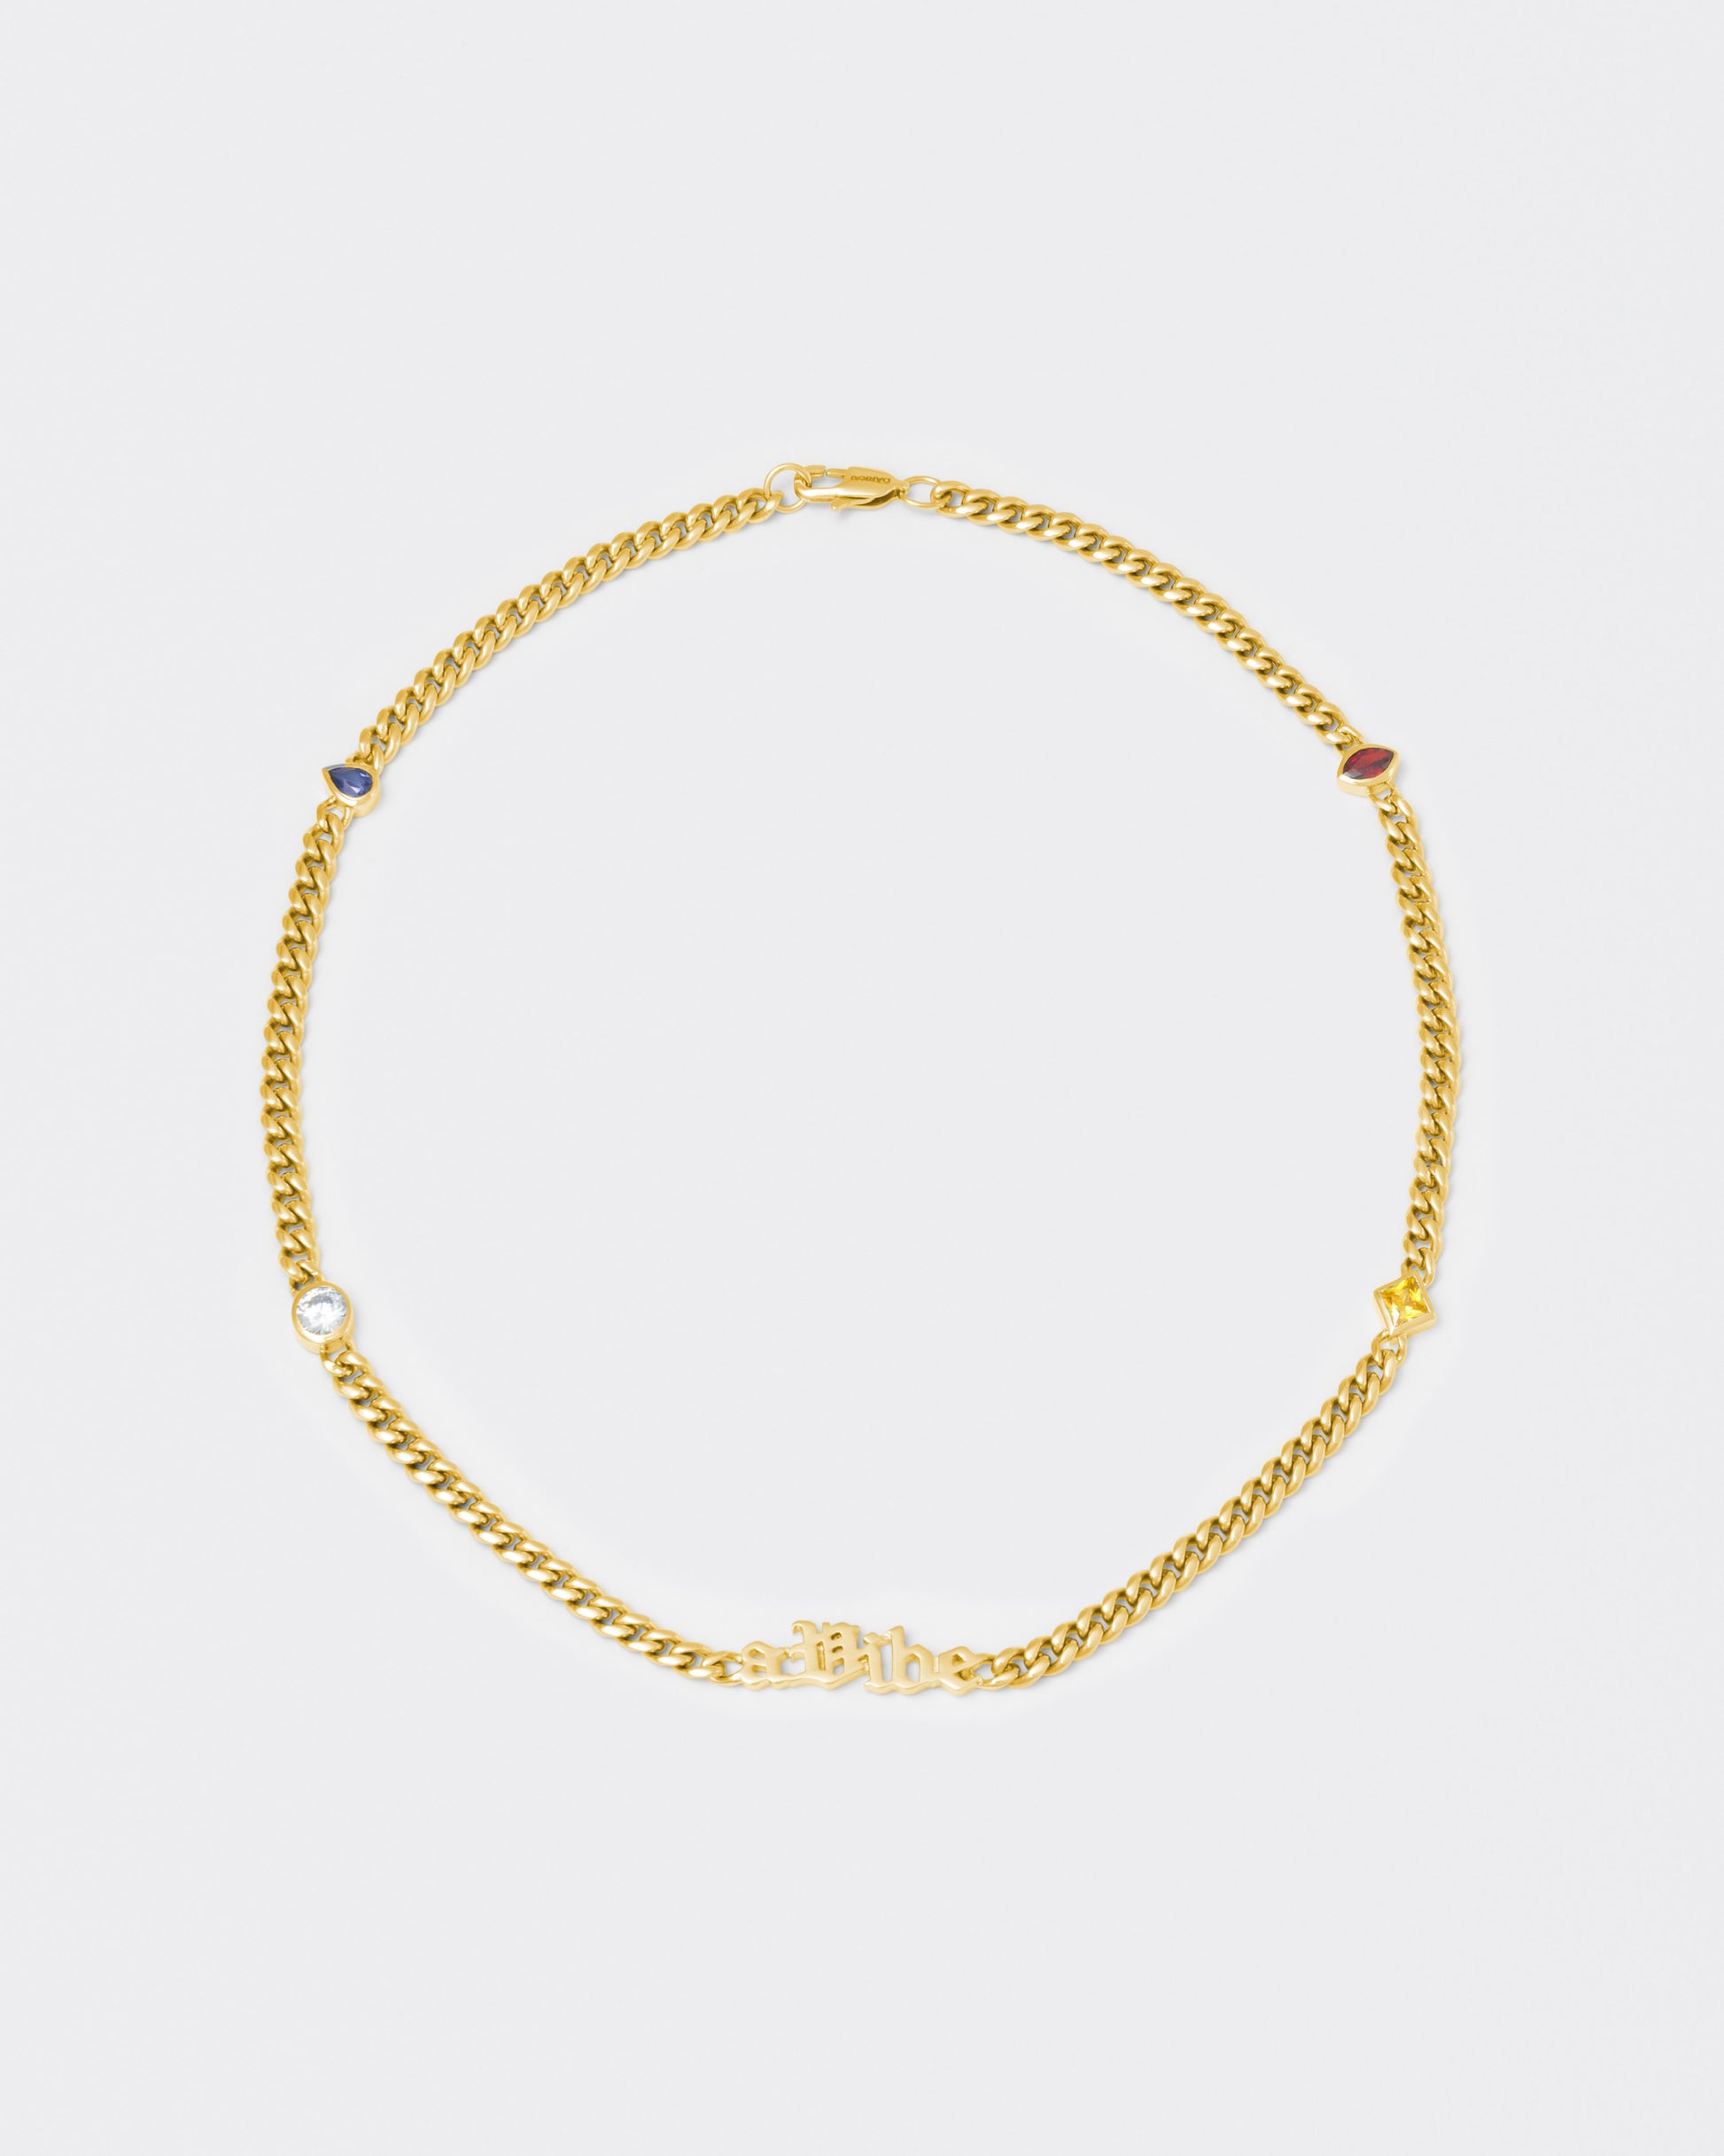 A Vibe cuban chain necklace with 18kt yellow gold coating, mixed shape bezel stones in diamond white, yellow, garnet, tanzanite and "A Vibe" central metal tag. Lobster clasp with logo